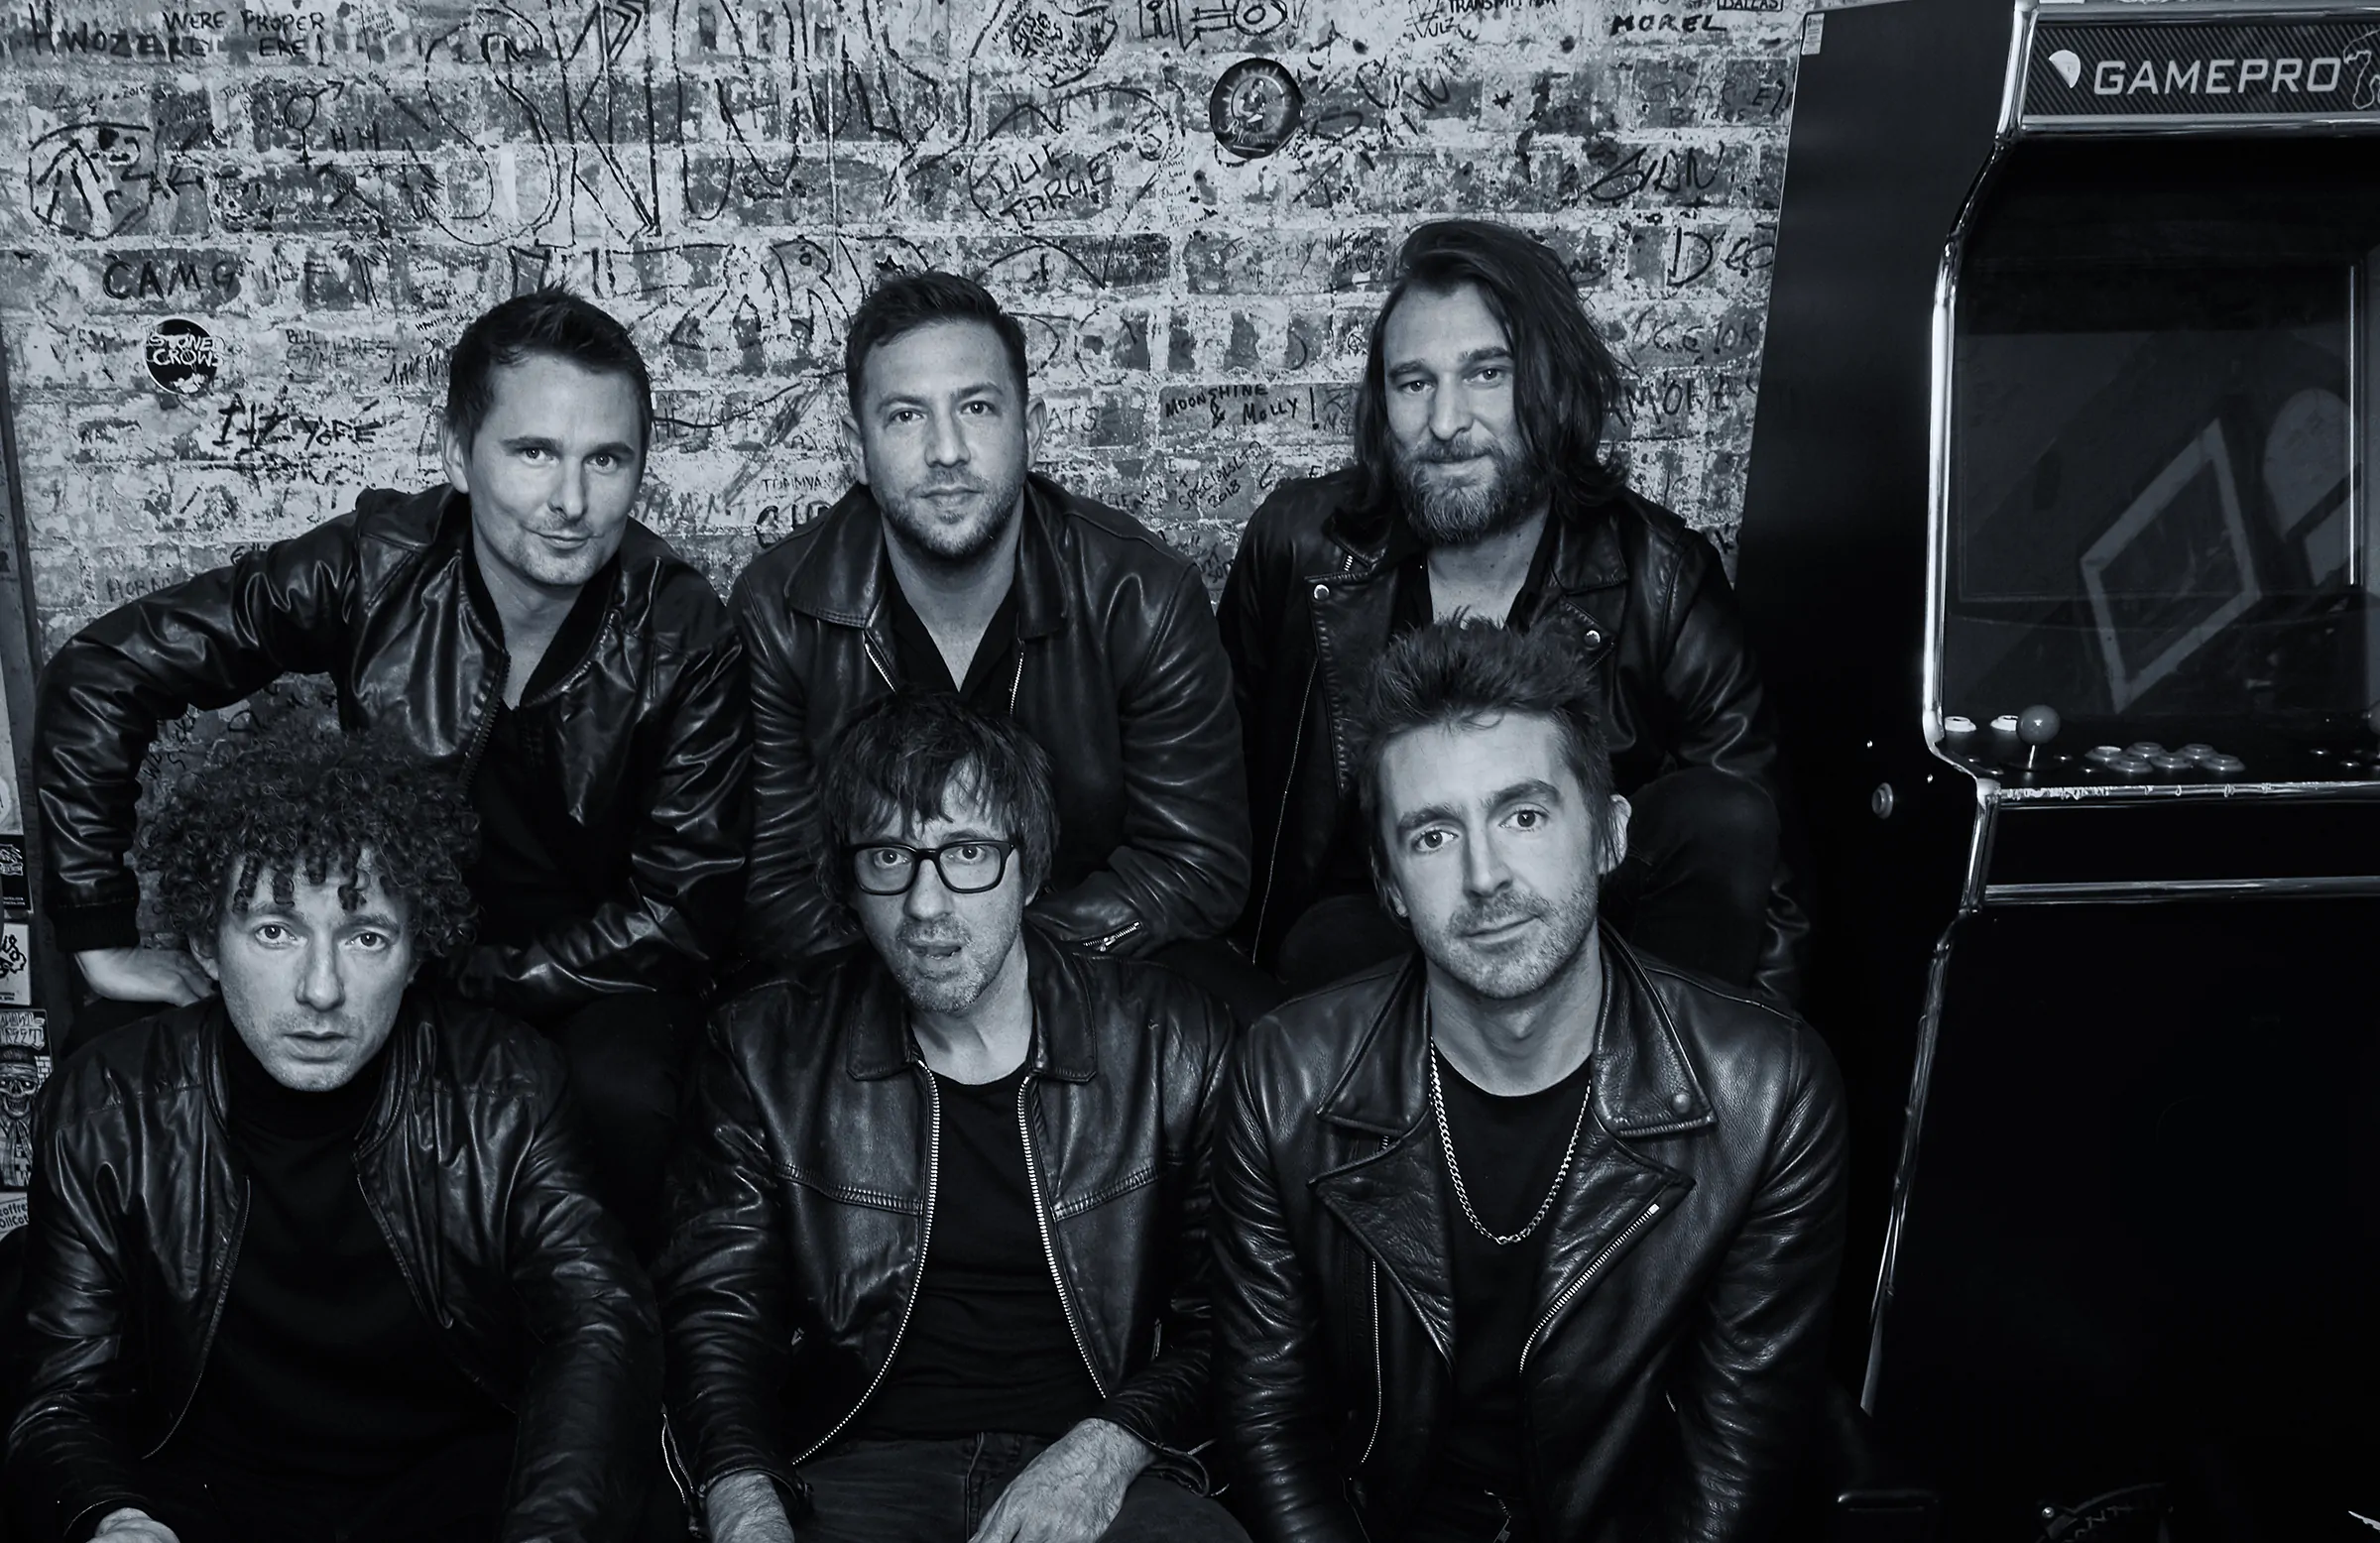 THE JADED HEARTS CLUB release debut track ‘Nobody But Me’ with Miles Kane on vocals